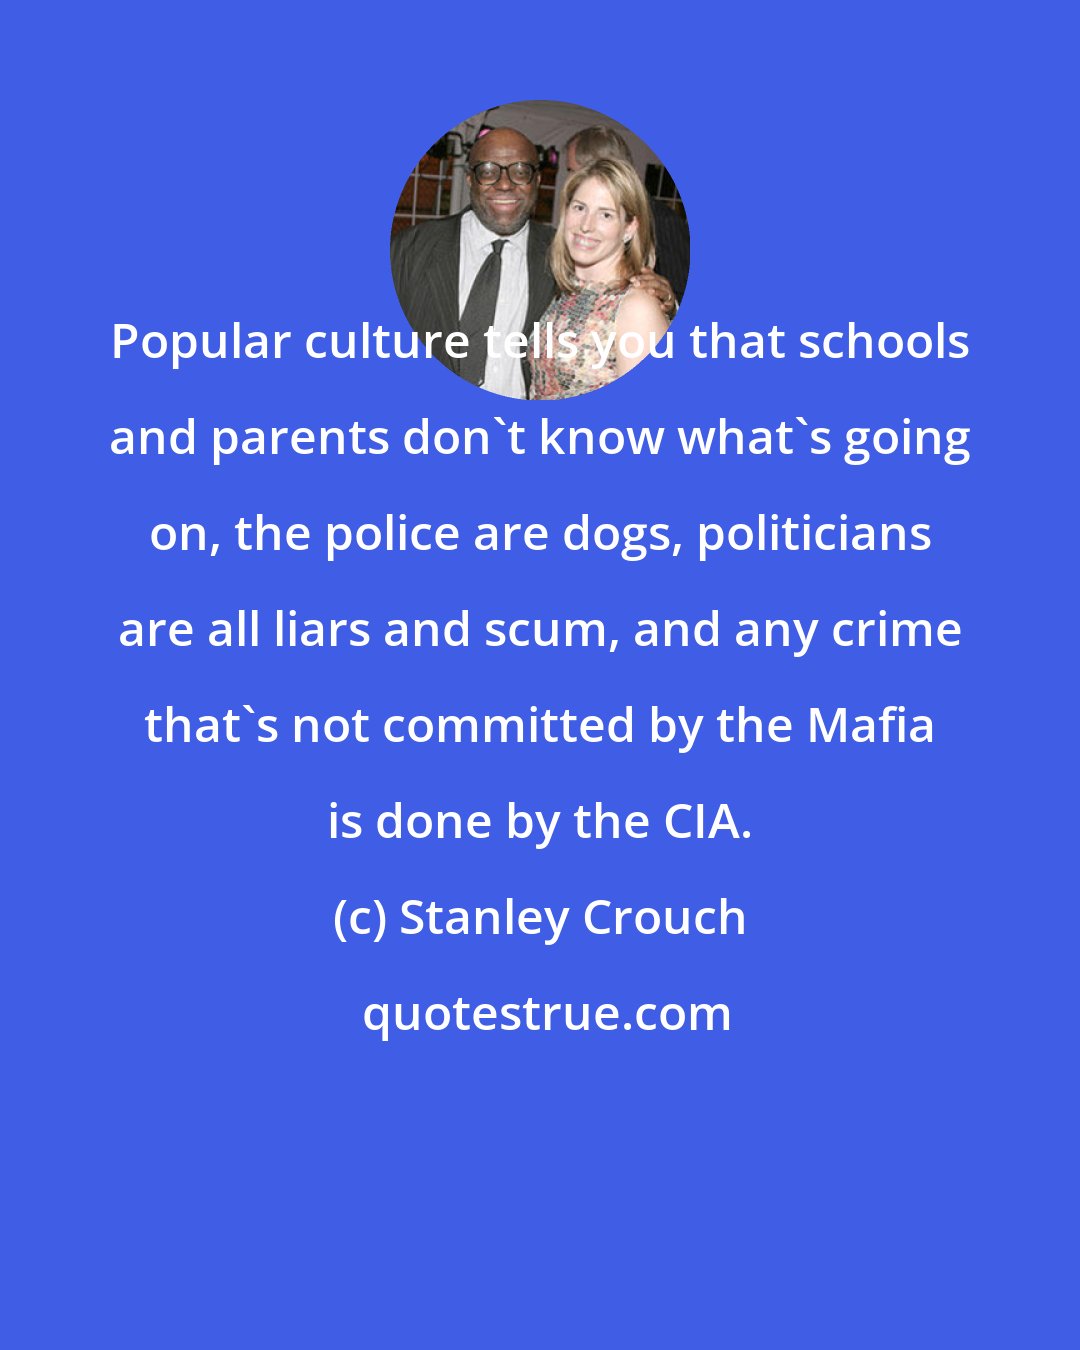 Stanley Crouch: Popular culture tells you that schools and parents don't know what's going on, the police are dogs, politicians are all liars and scum, and any crime that's not committed by the Mafia is done by the CIA.